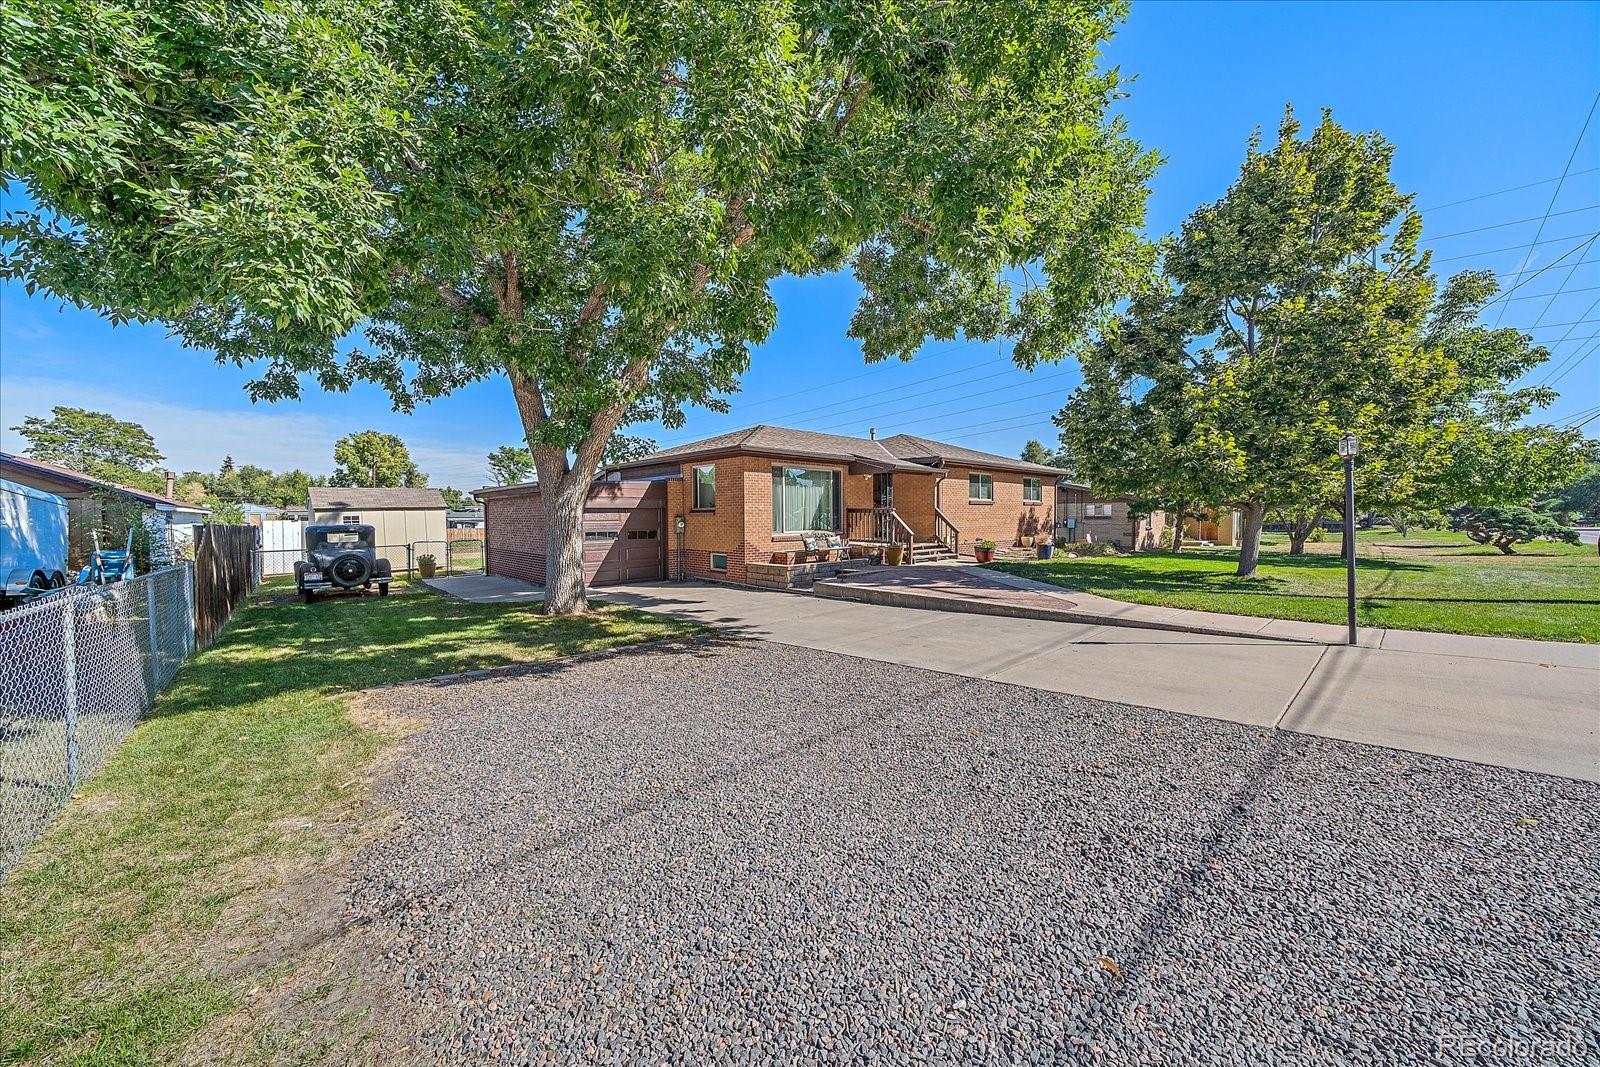 Report Image for 5895 W 1st Avenue,Lakewood, Colorado